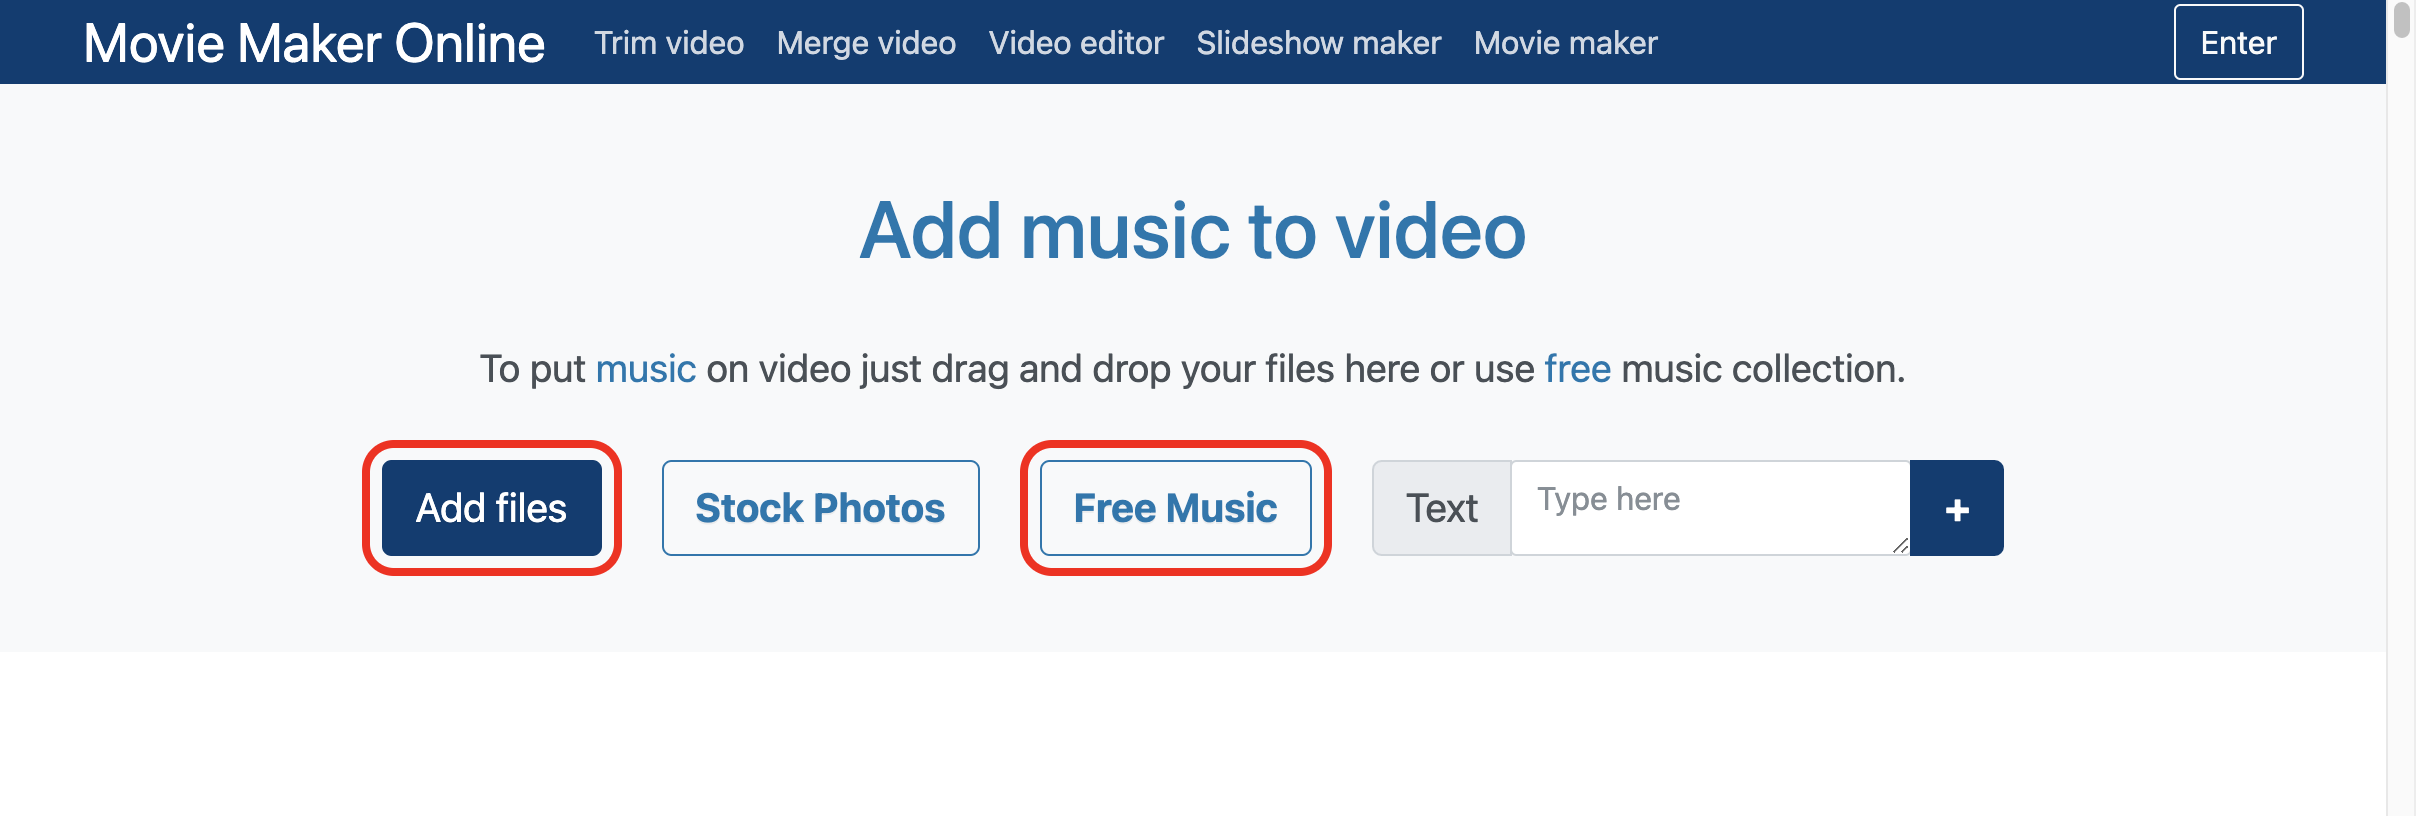 Add music to video - upload files